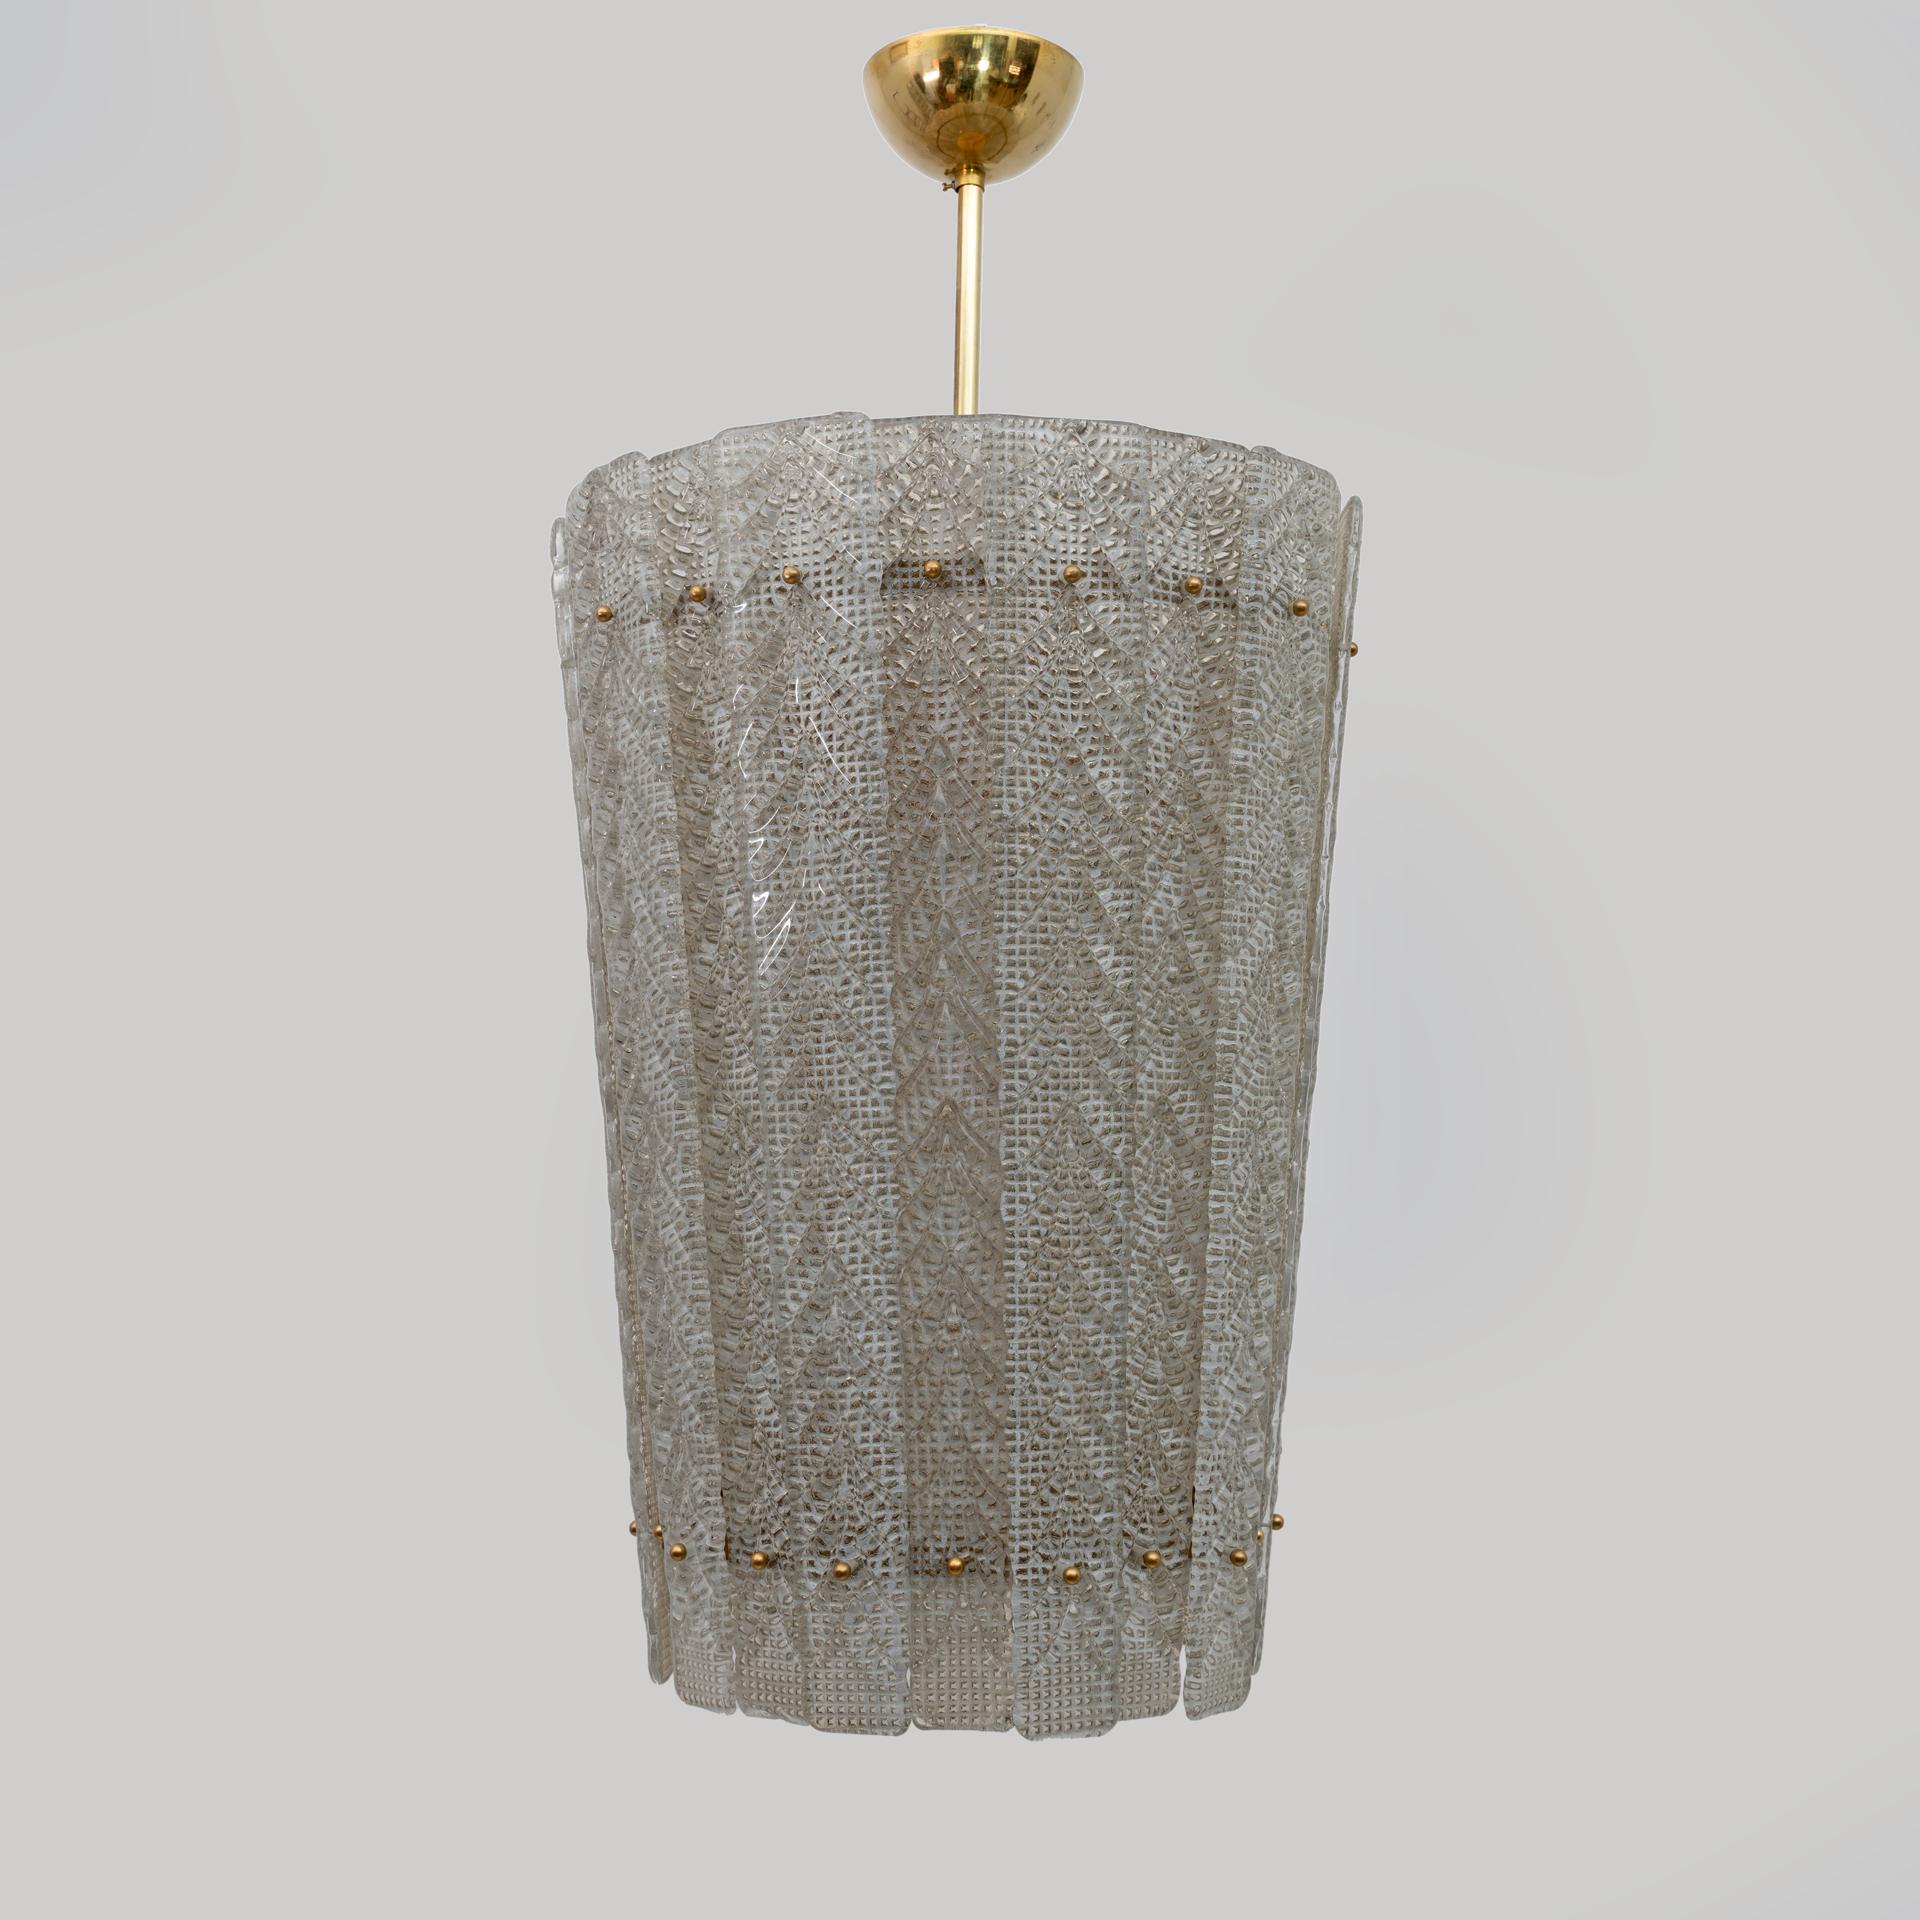 This fabulous Art Deco lantern-shaped chandelier is composed of printed and textured glass sheets fixed with brass spheres on a metal and brass structure, made entirely by hand by the master glassmakers of Boarovier & Toso in Murano.
The glass body